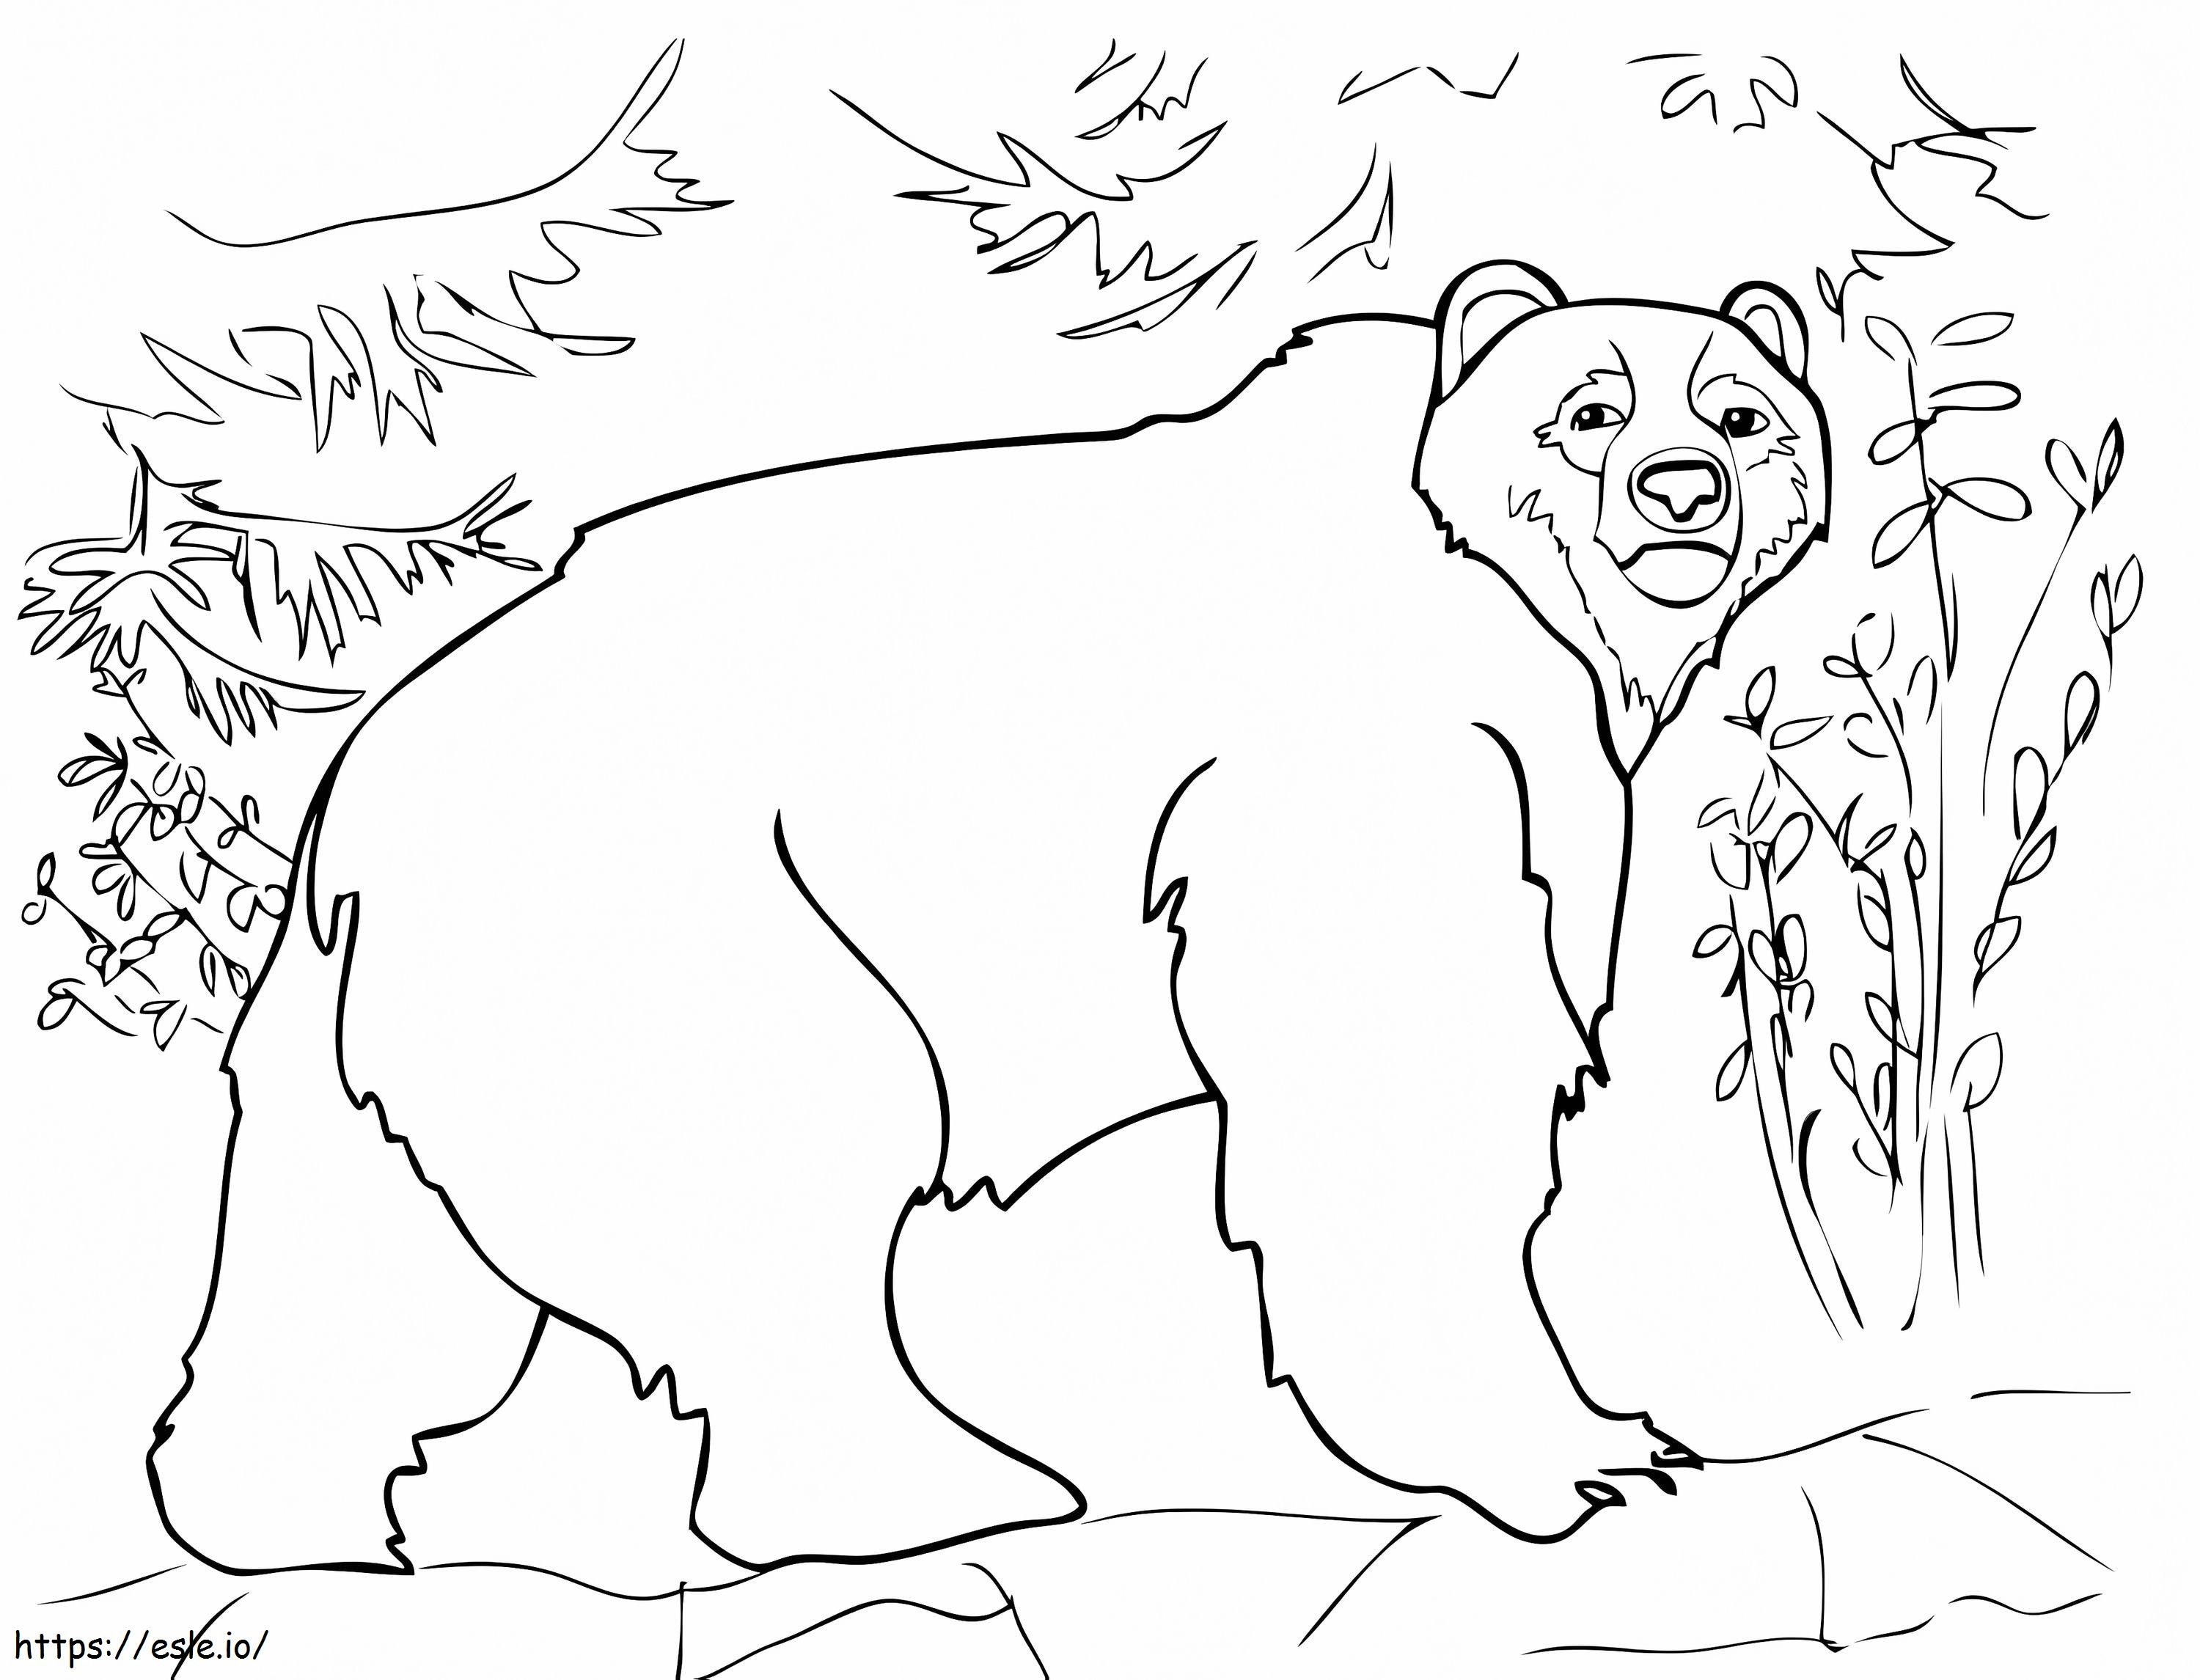 A Brown Bear coloring page